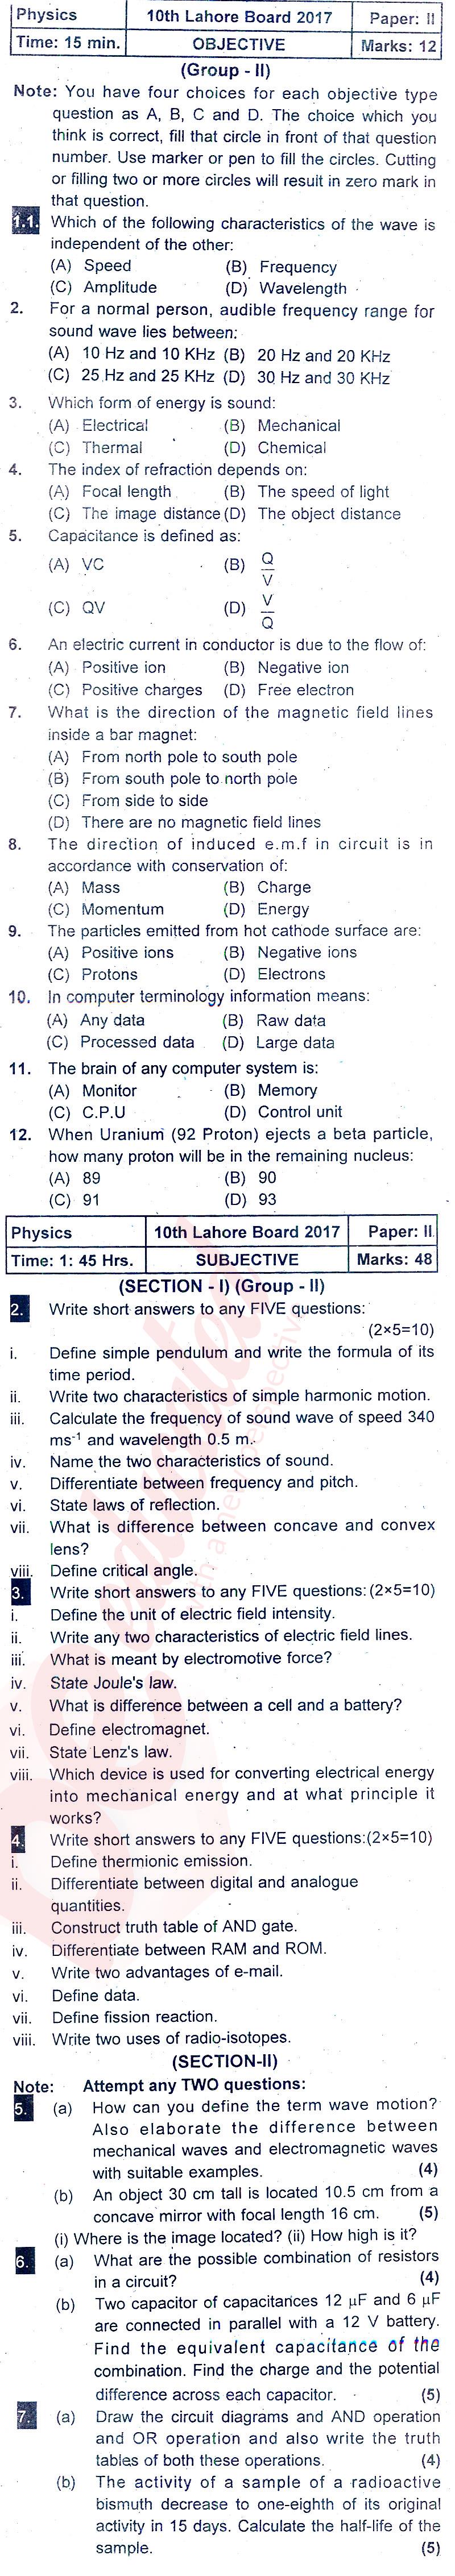 Physics 10th class Past Paper Group 2 BISE Lahore 2017